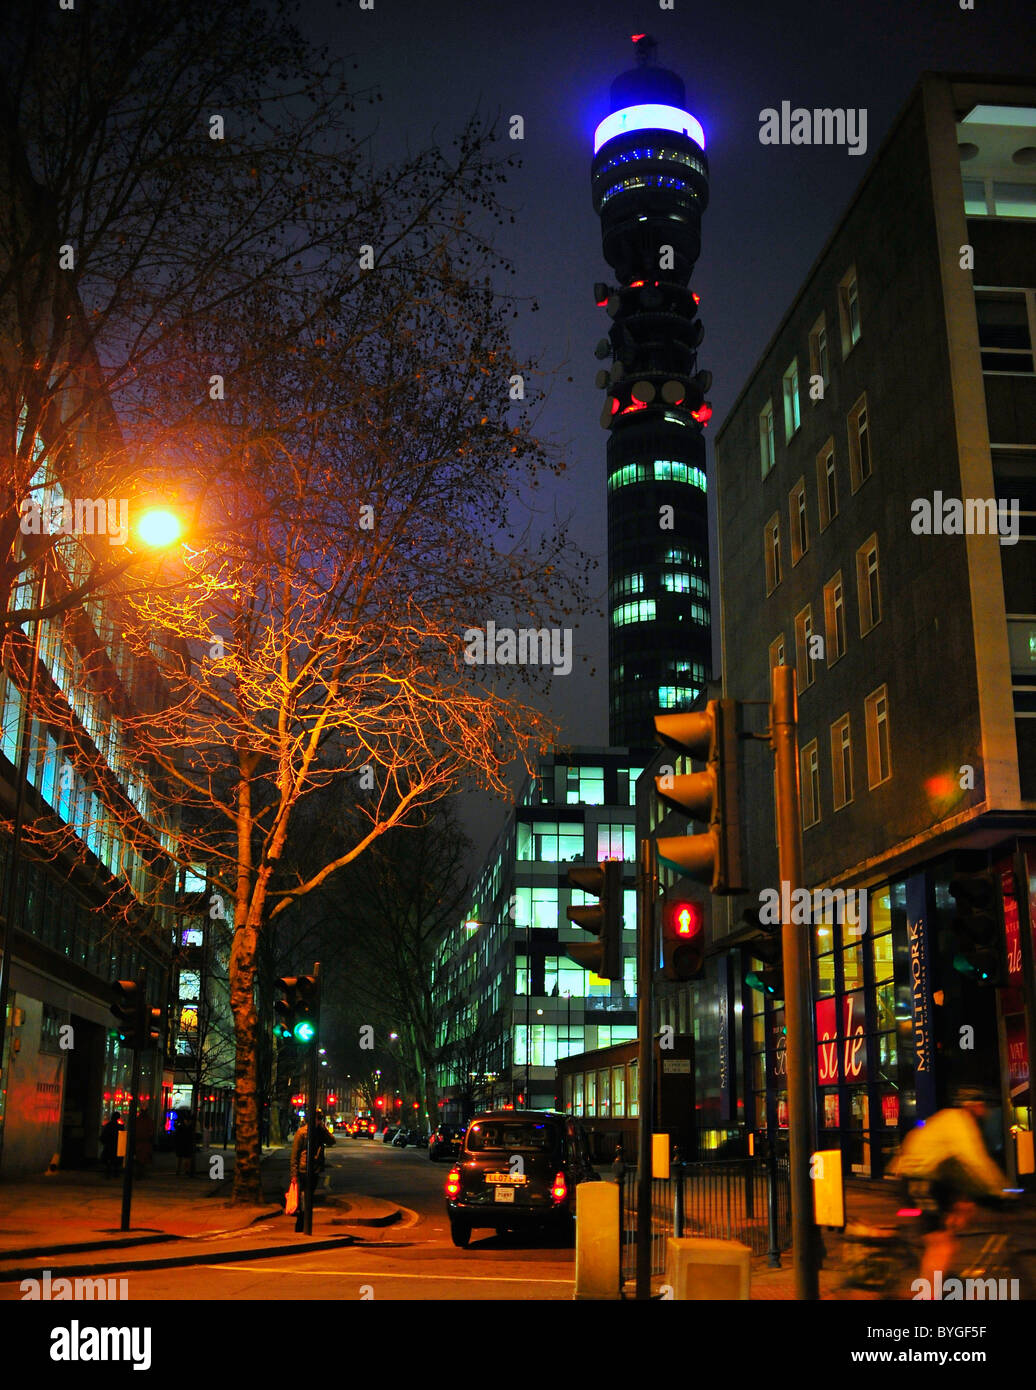 Streetscape at night with BT tower Post Office Tower, London Stock Photo